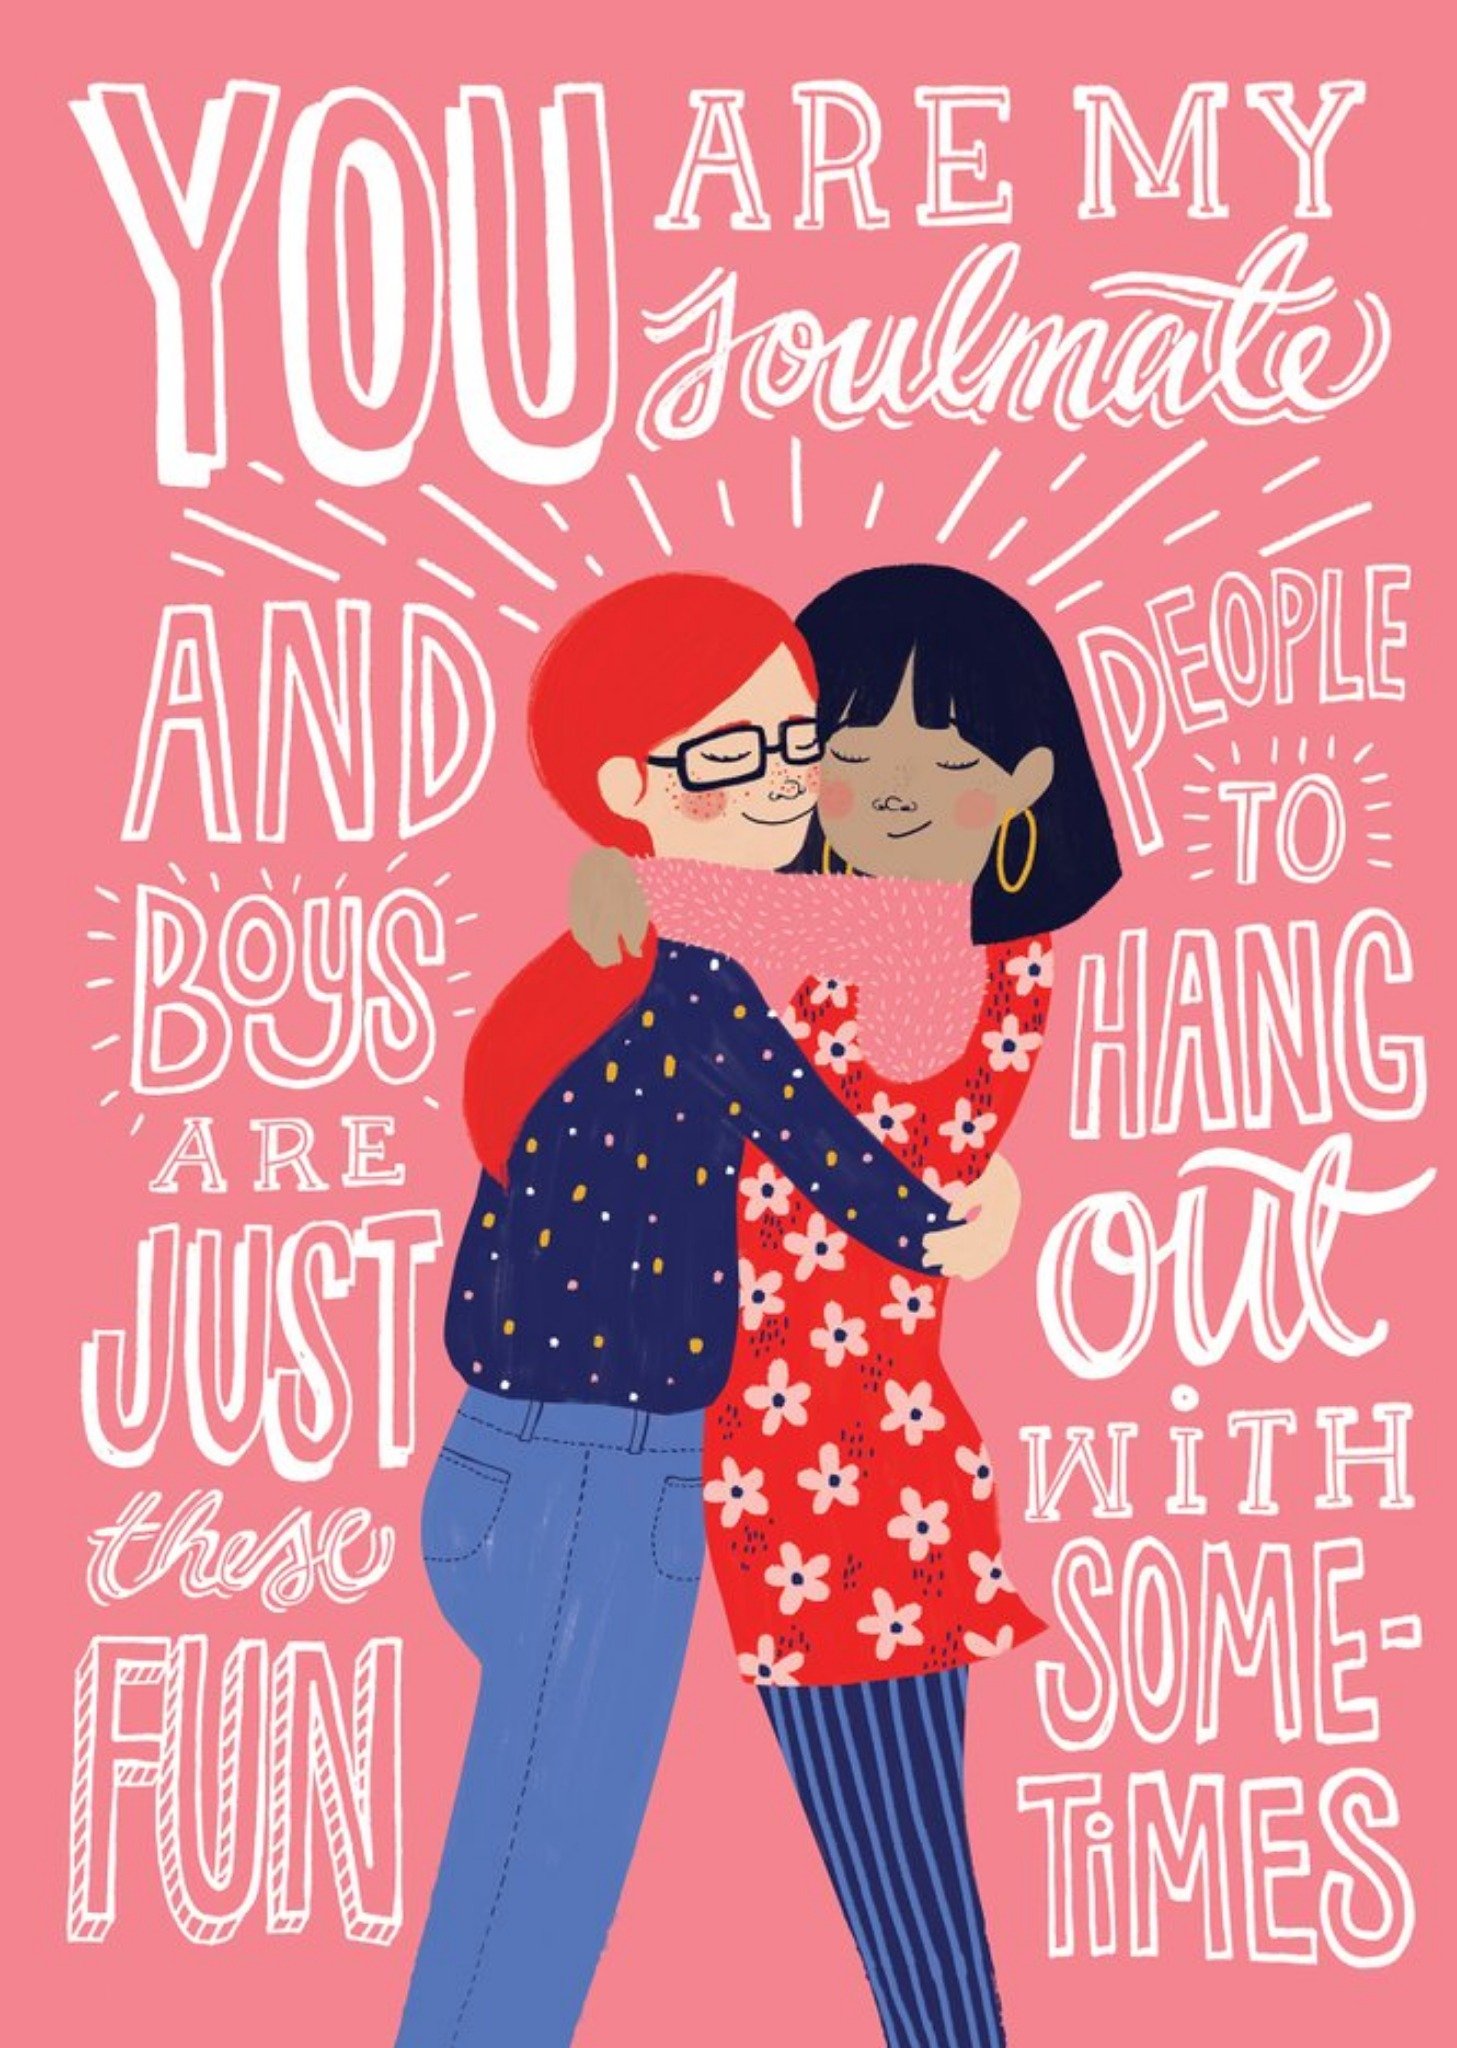 Cardy Club Soulmates Typographic Friendship Card, Large